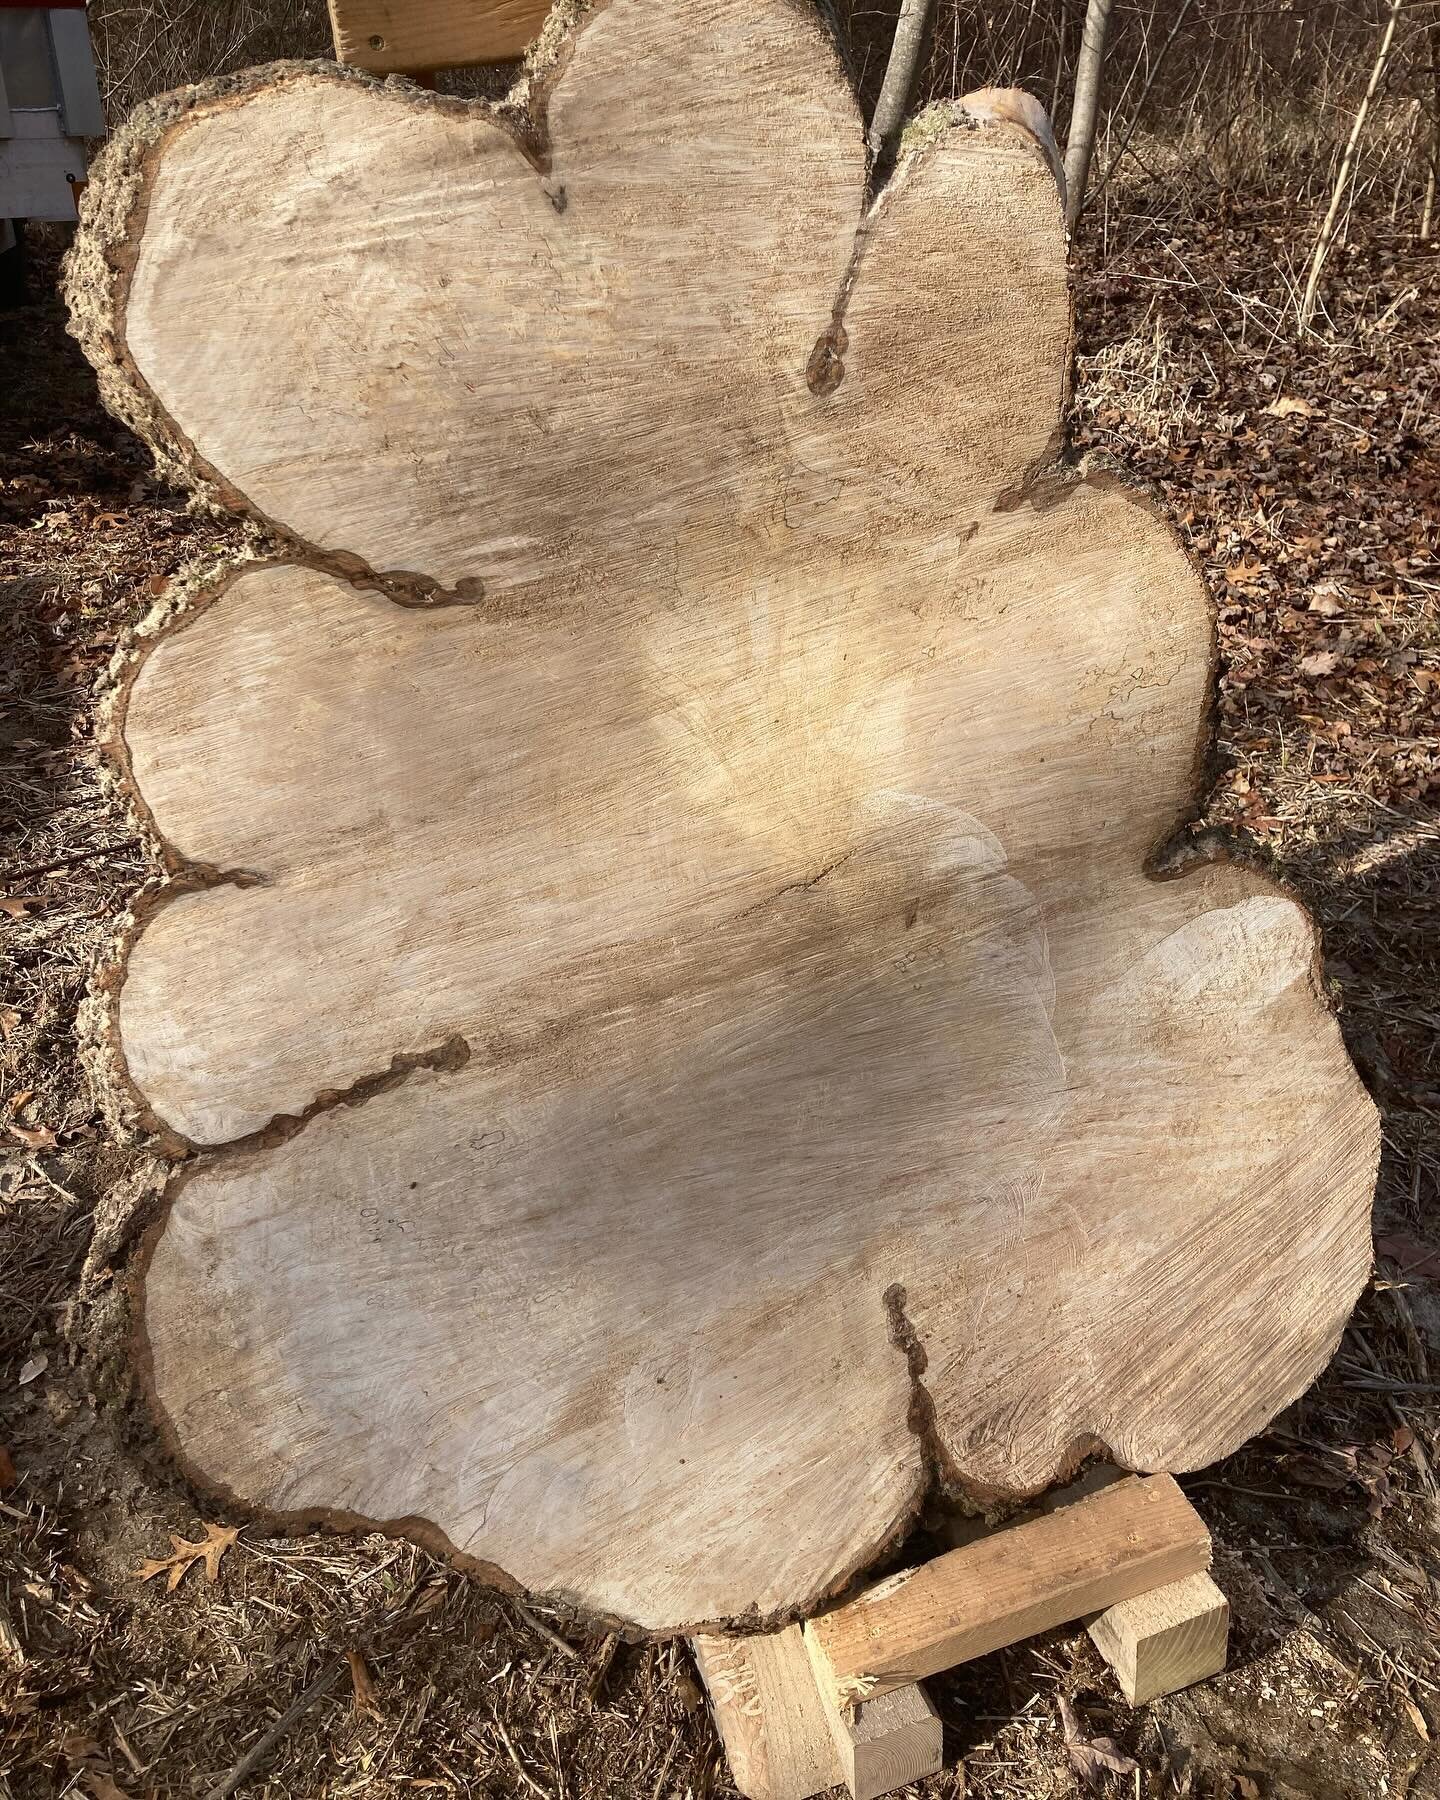 Many challenge points and delays, but finally got this 3.5-foot-tall round (and a few others) cut for a customer. These are from a giant but failing yard maple that he loved but had to take down. Beautiful tribute.